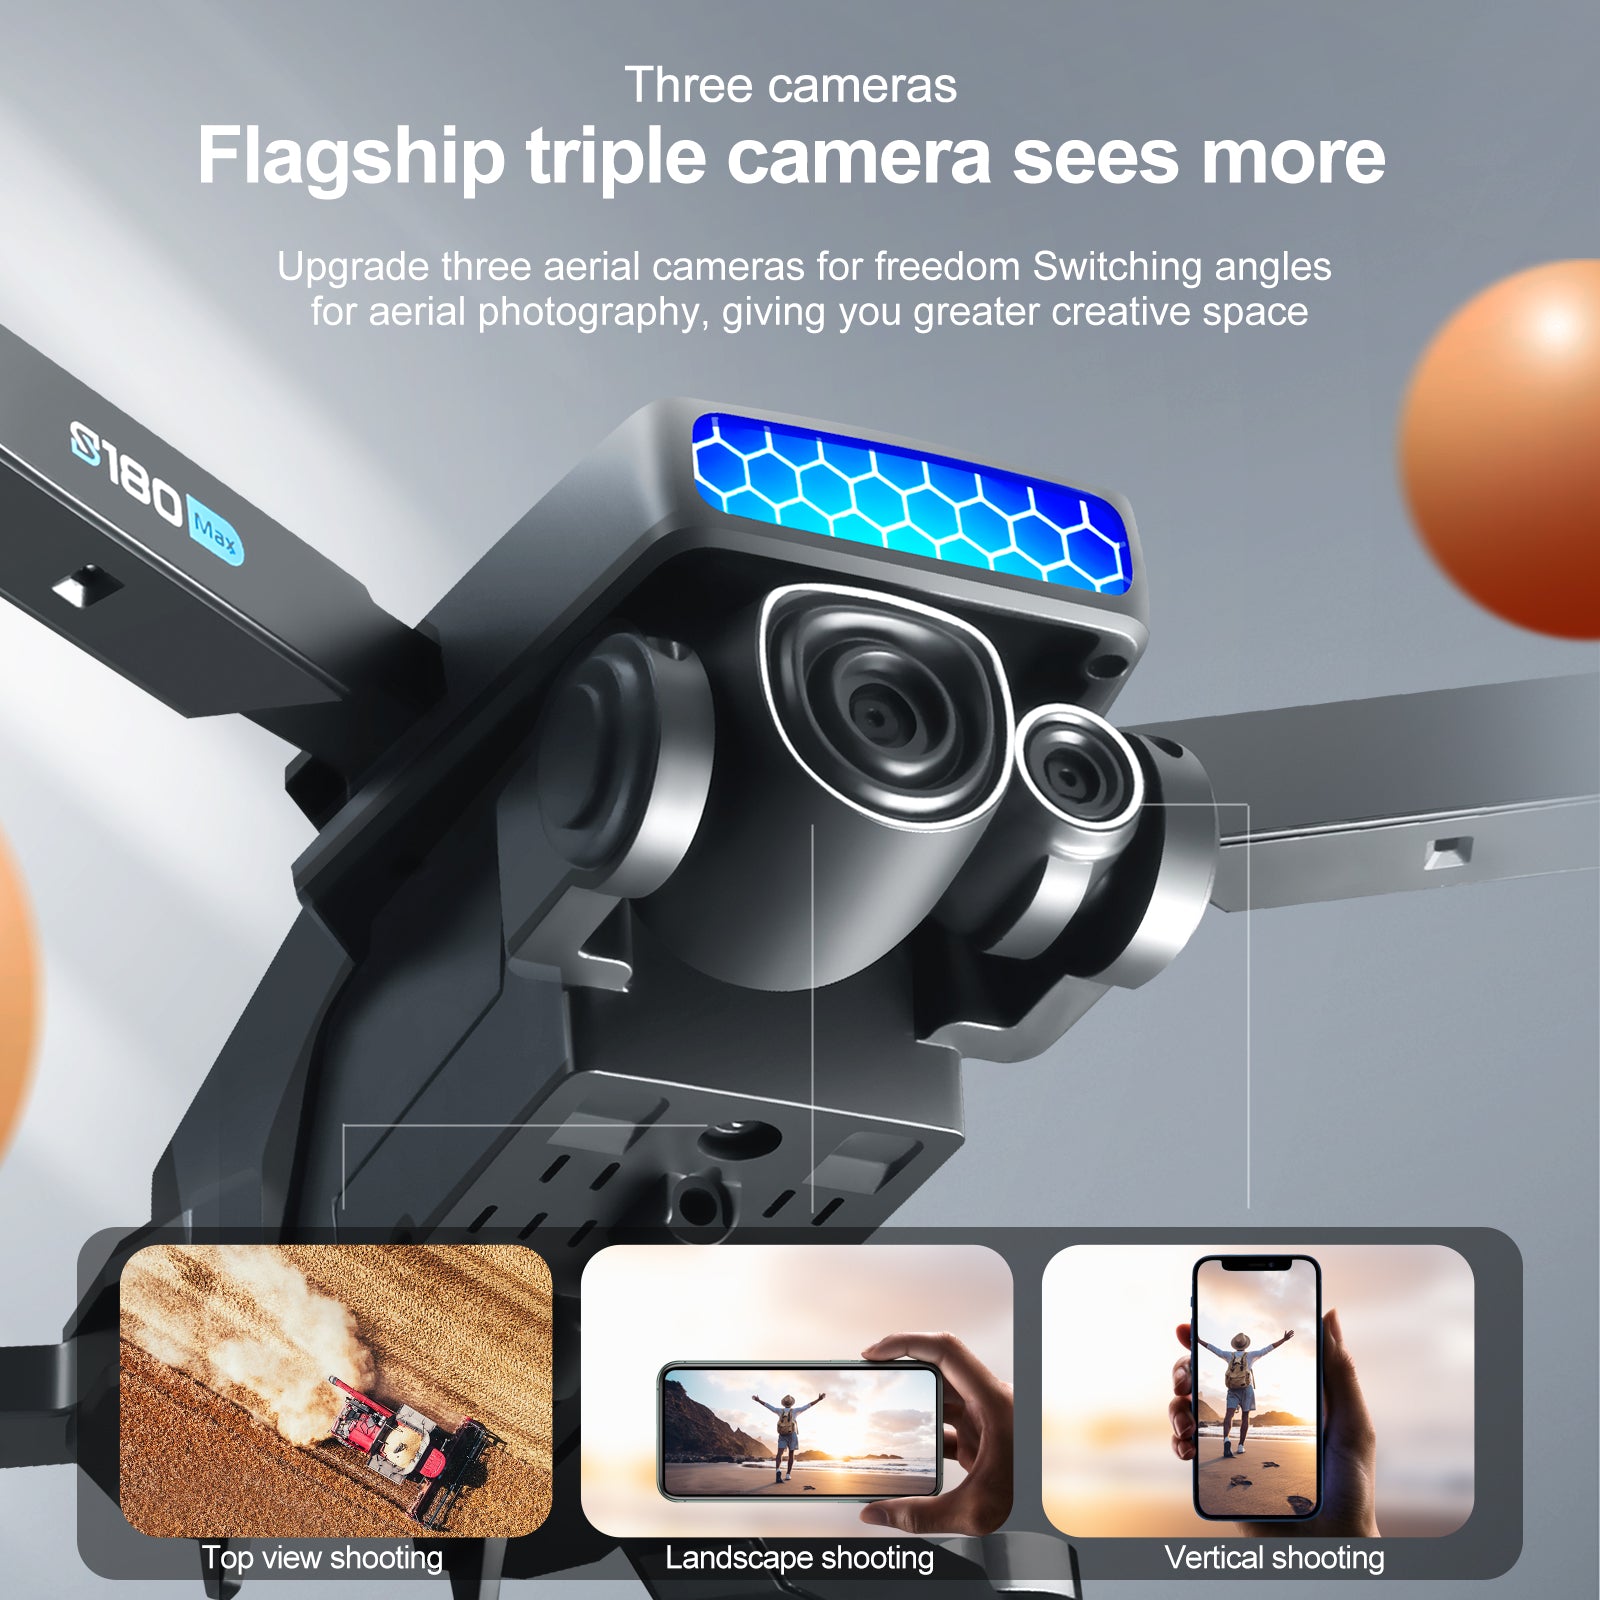 S180 Drone, Triple camera system with adjustable angles for creative photography modes.